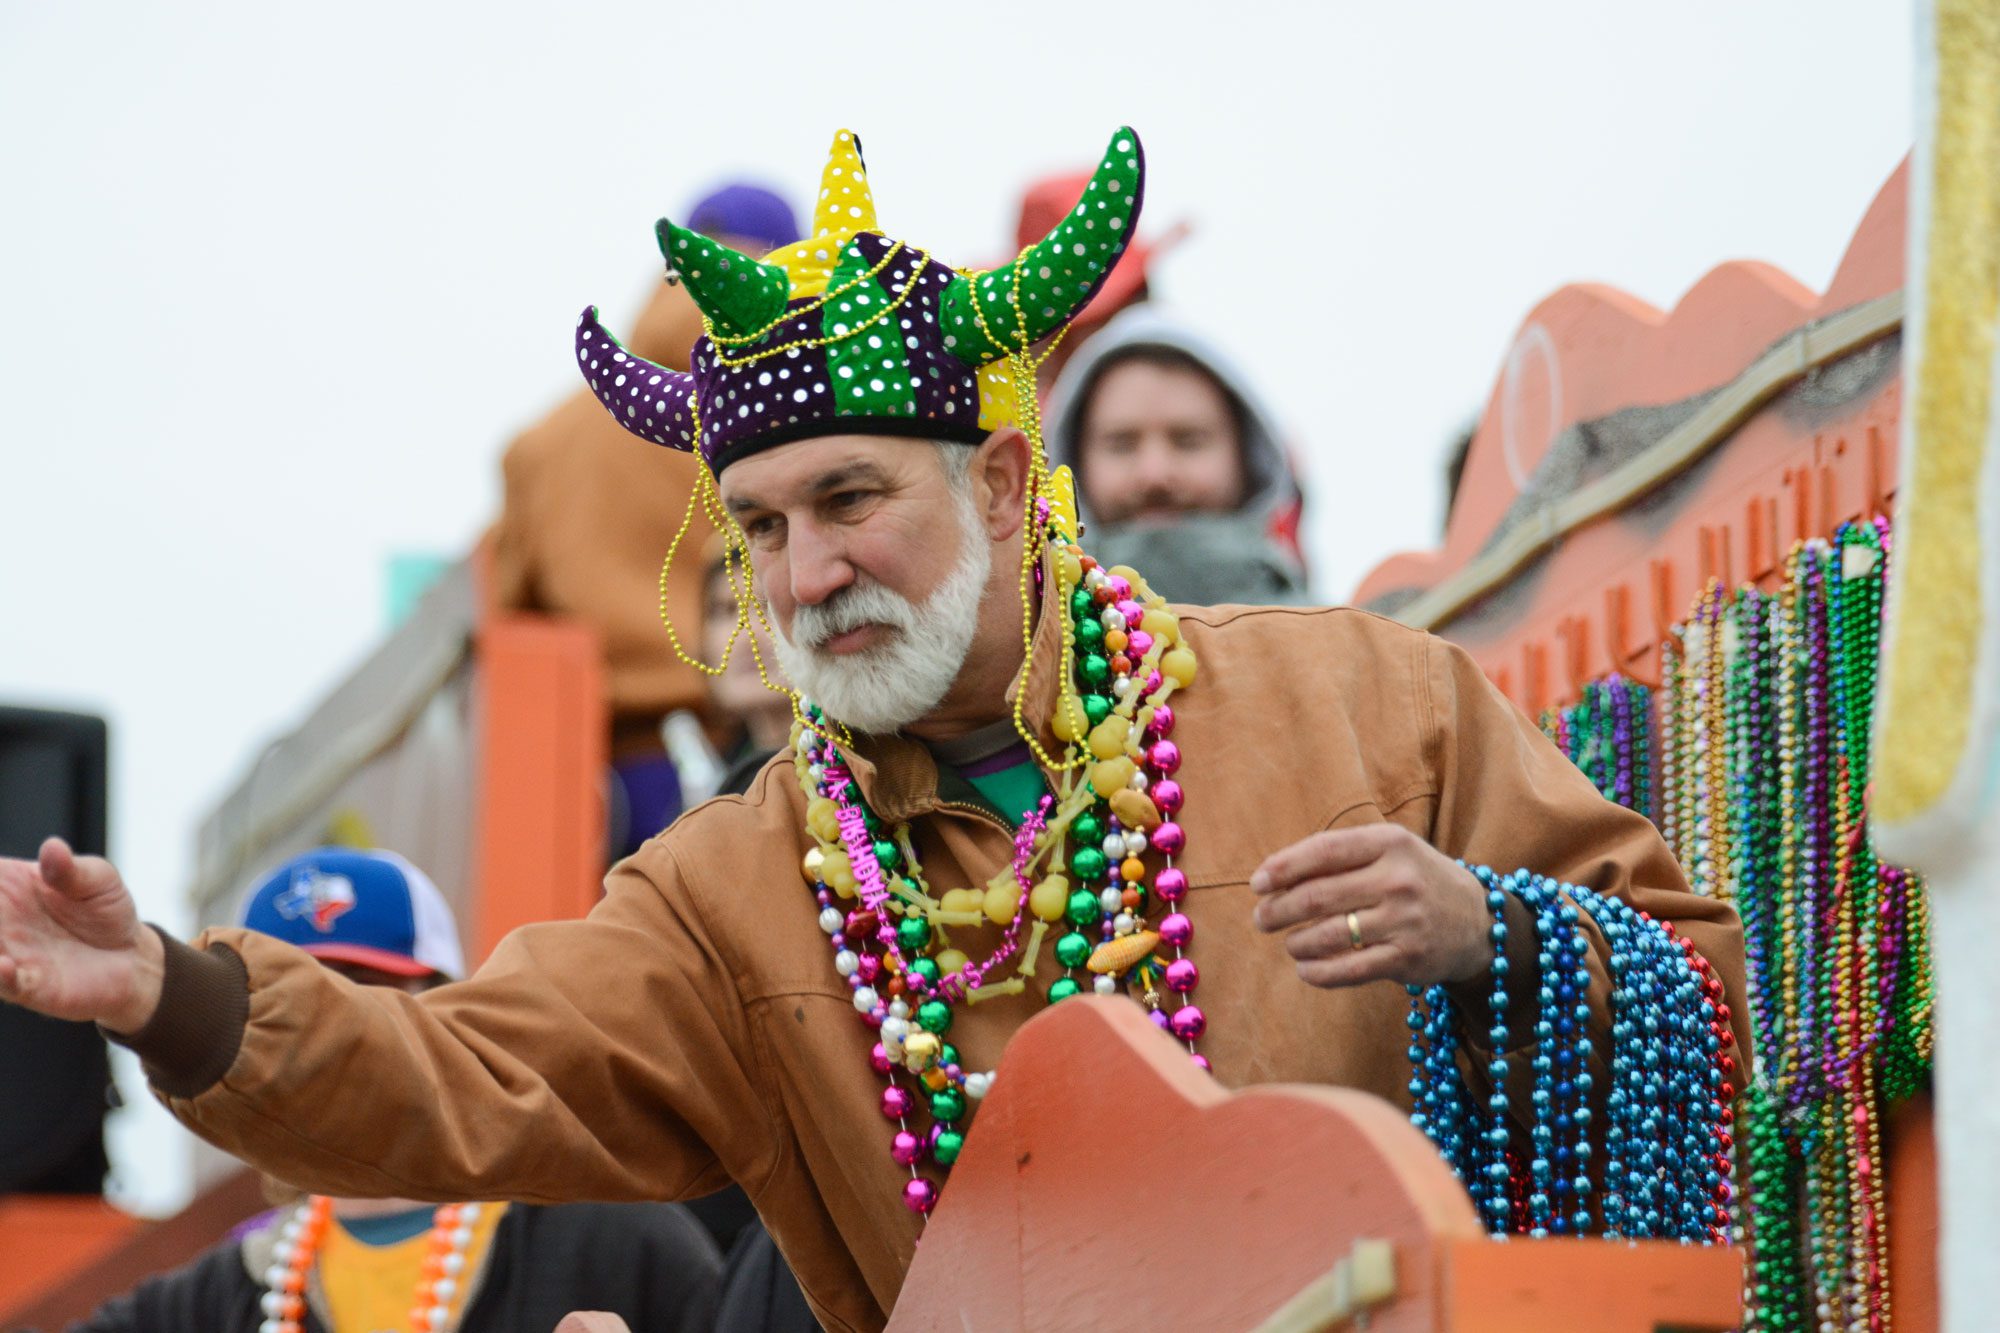 man riding float in parade